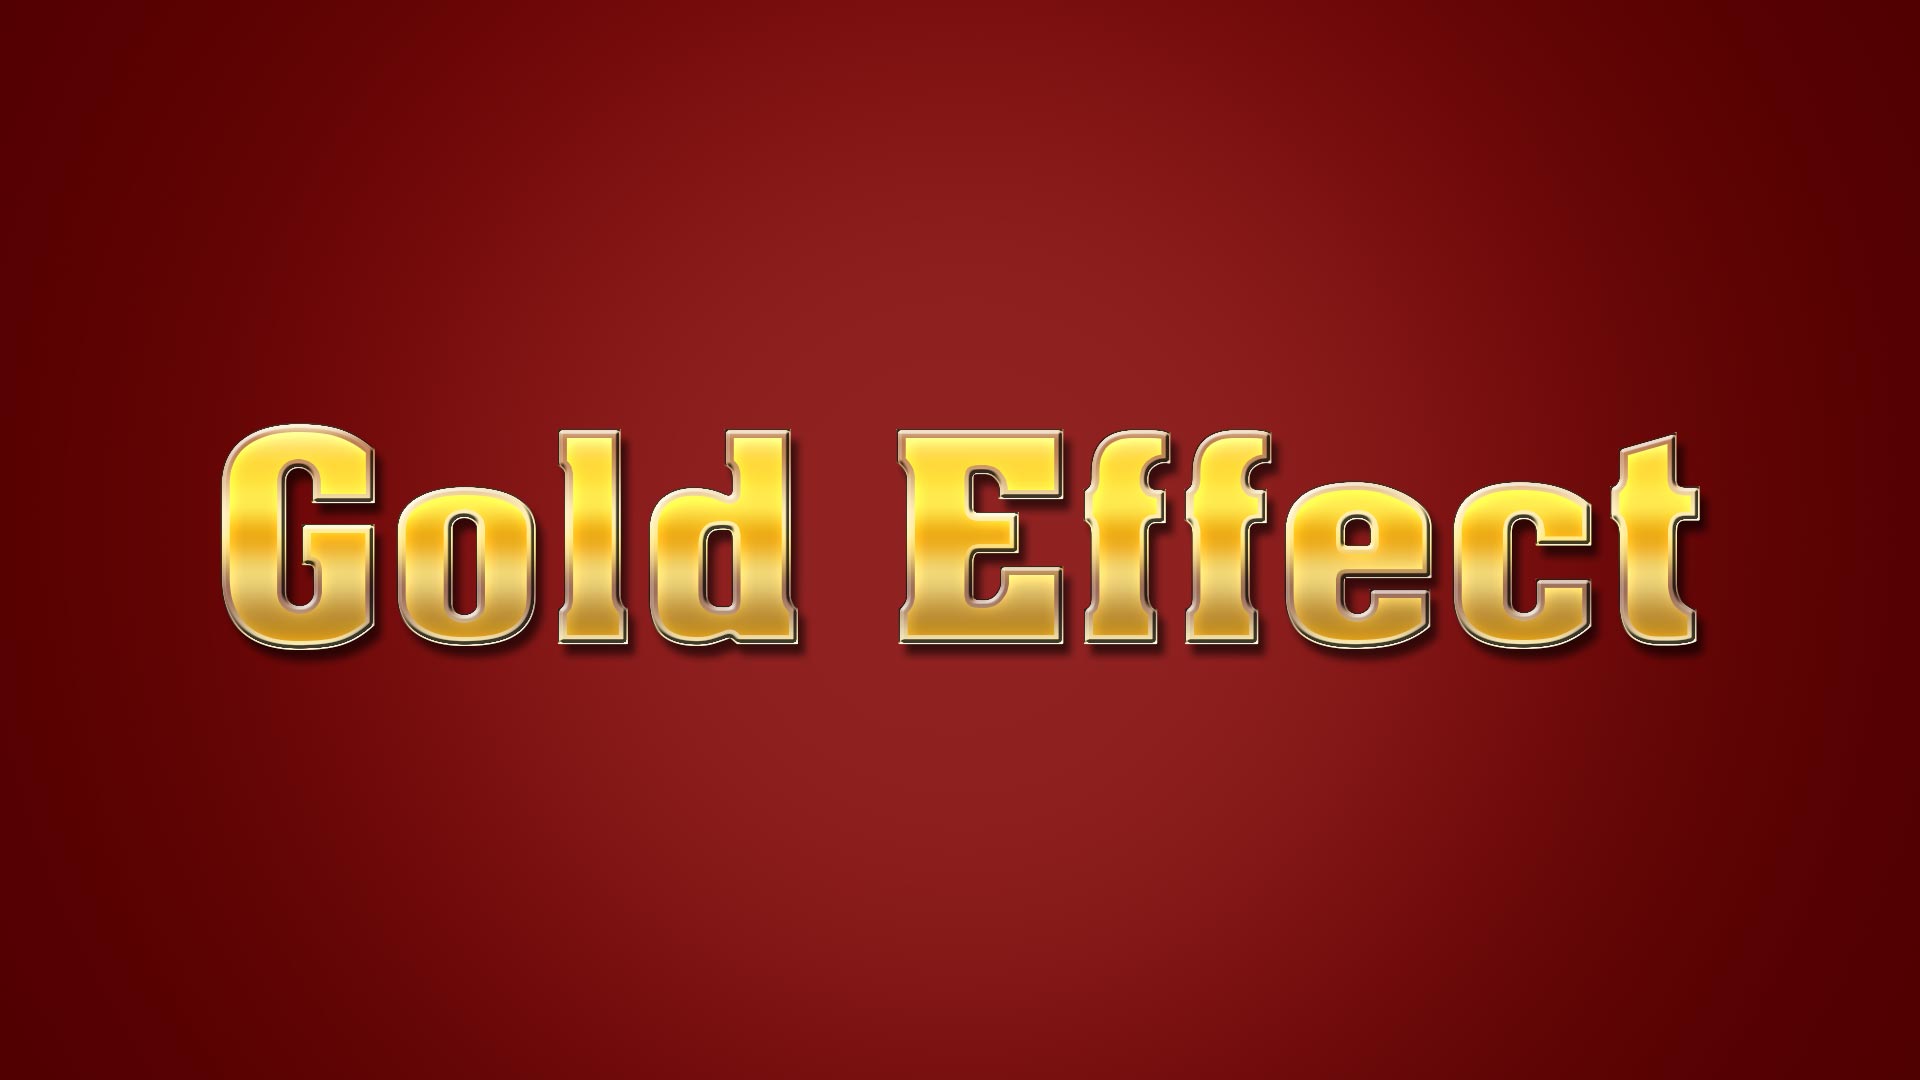 Gold Effect PSD File-Download Free